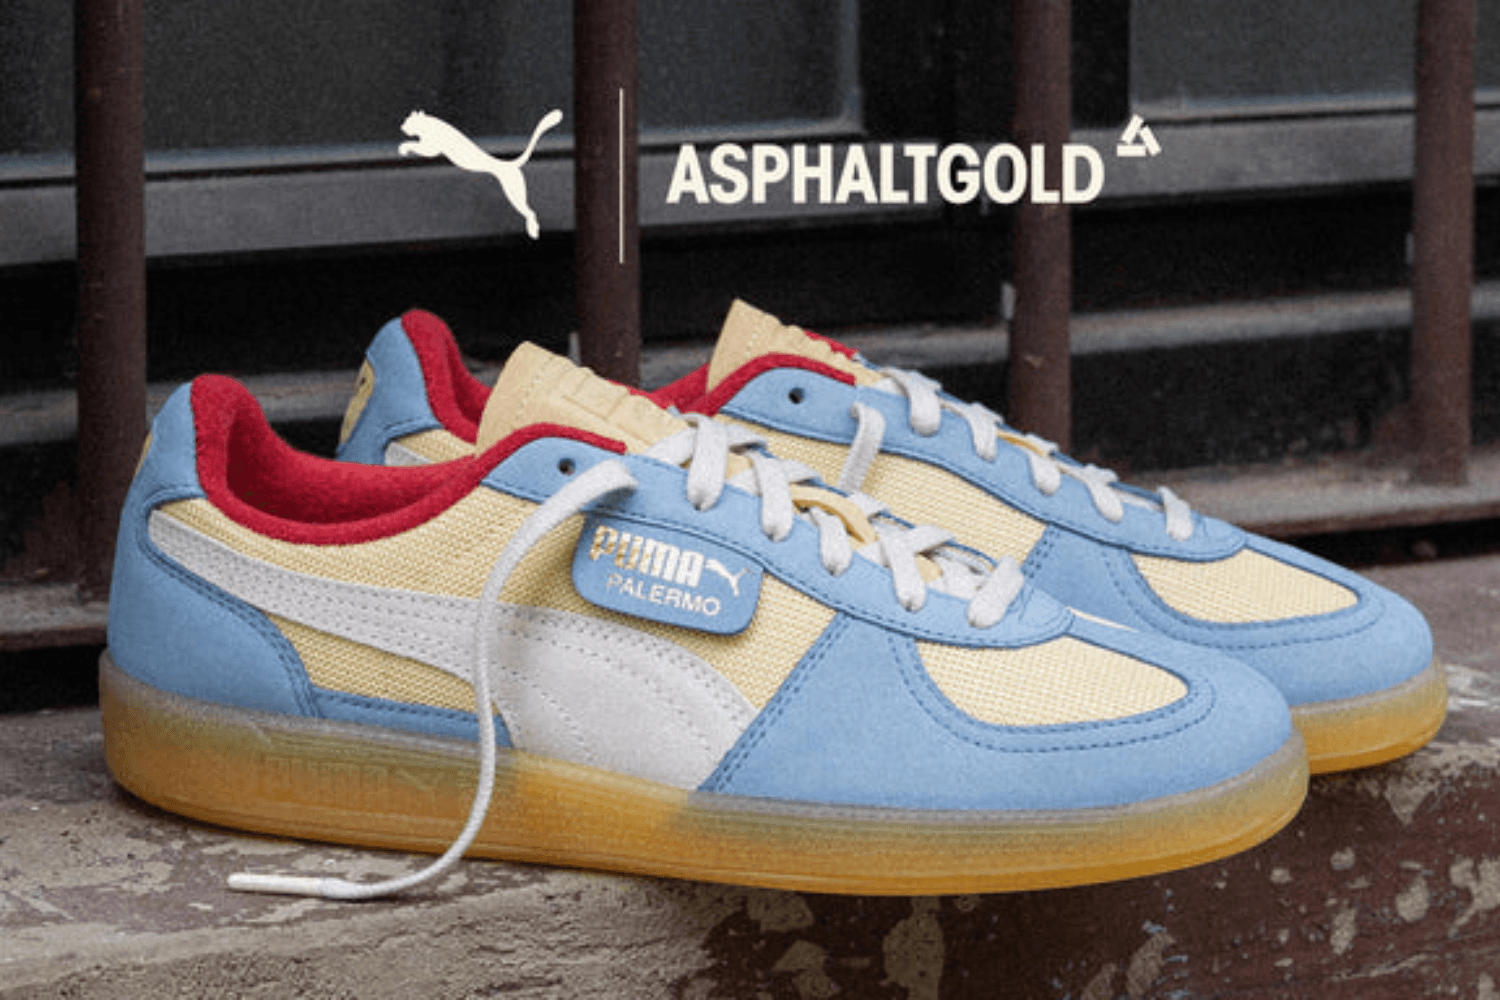 The Asphaltgold x PUMA Palermo 'Scopa' pays homage to the Italian card game